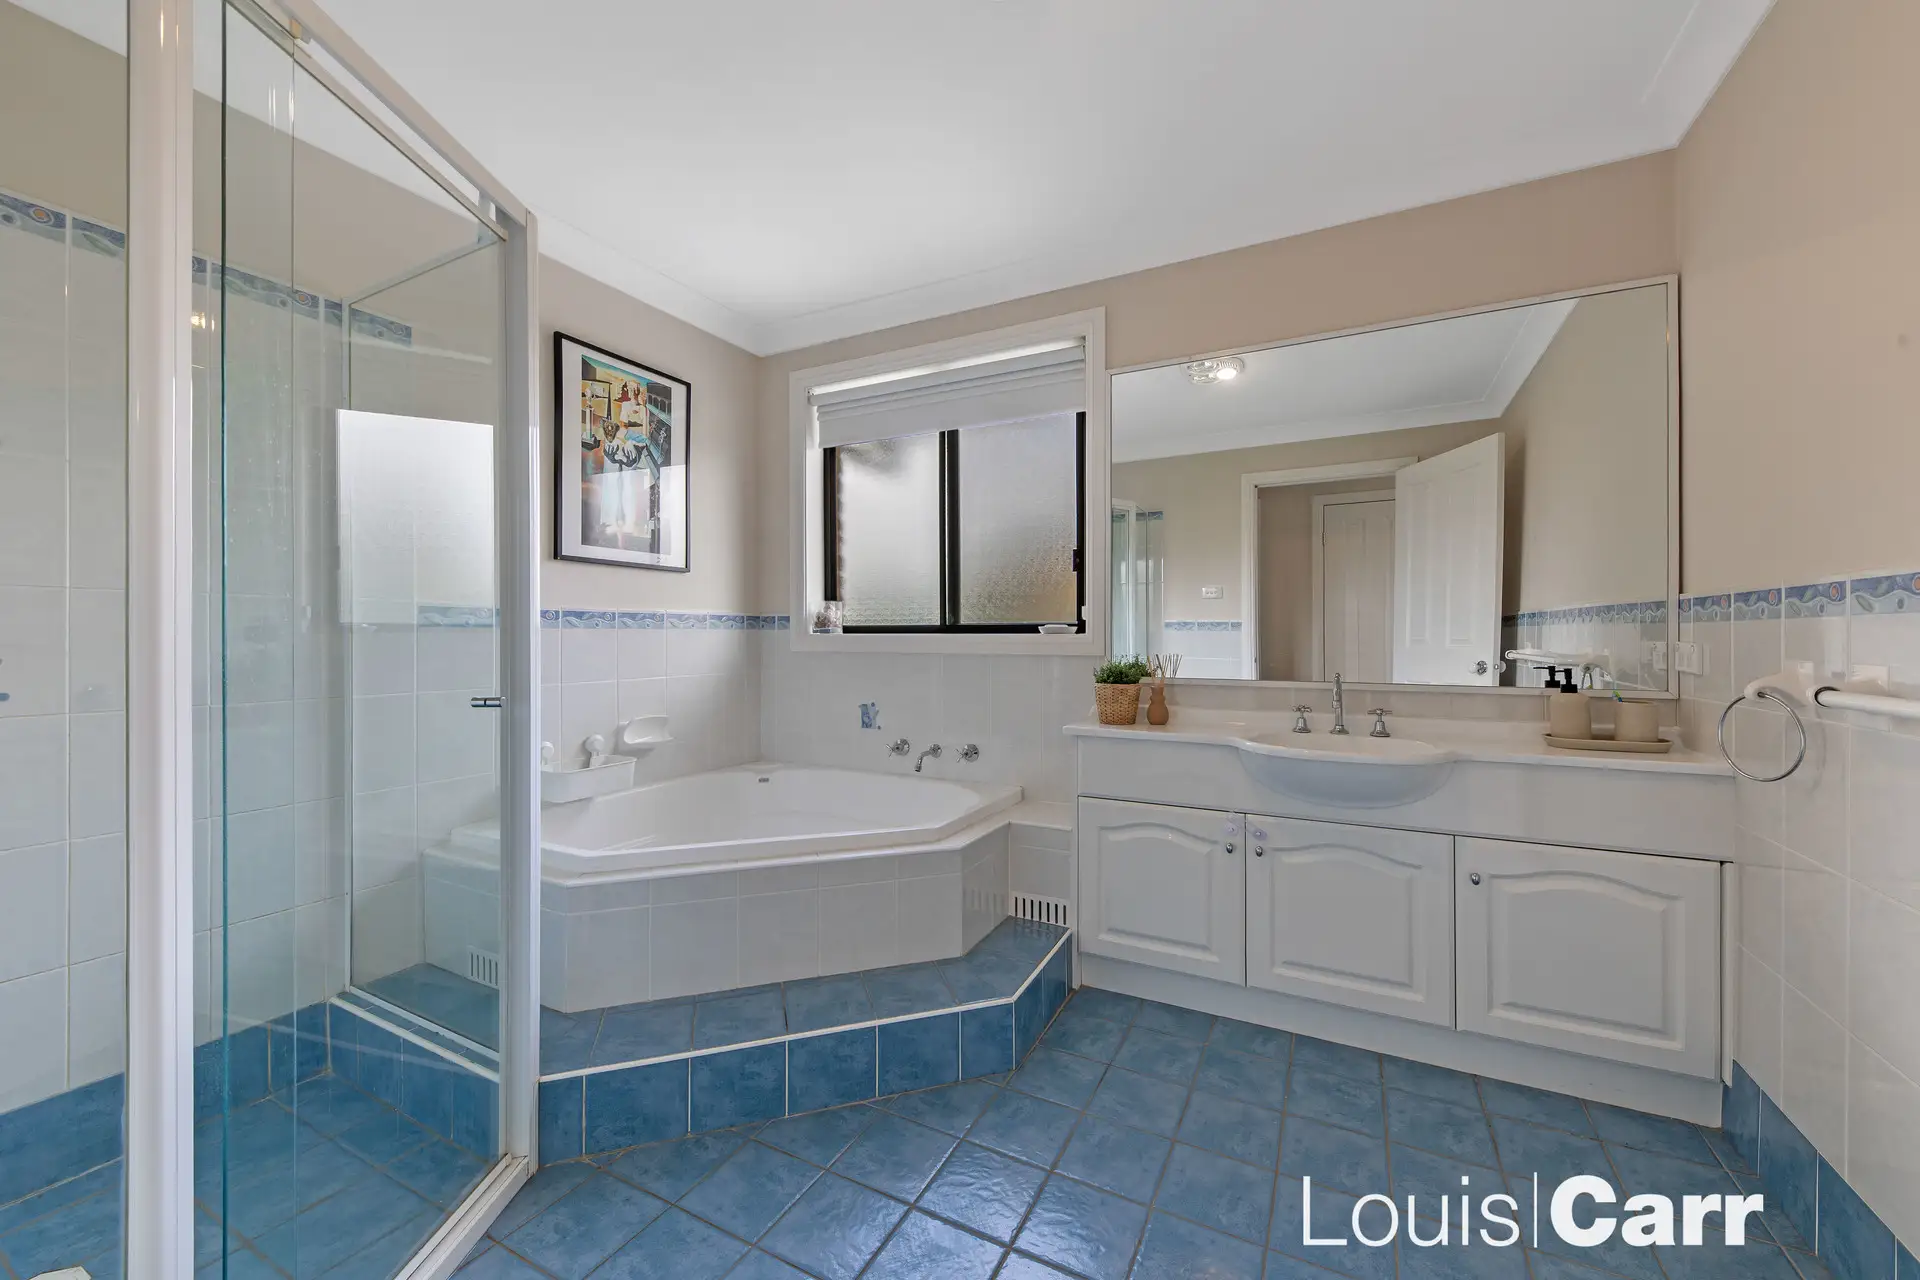 Photo #9: 23 Queensbury Avenue, Kellyville - Sold by Louis Carr Real Estate